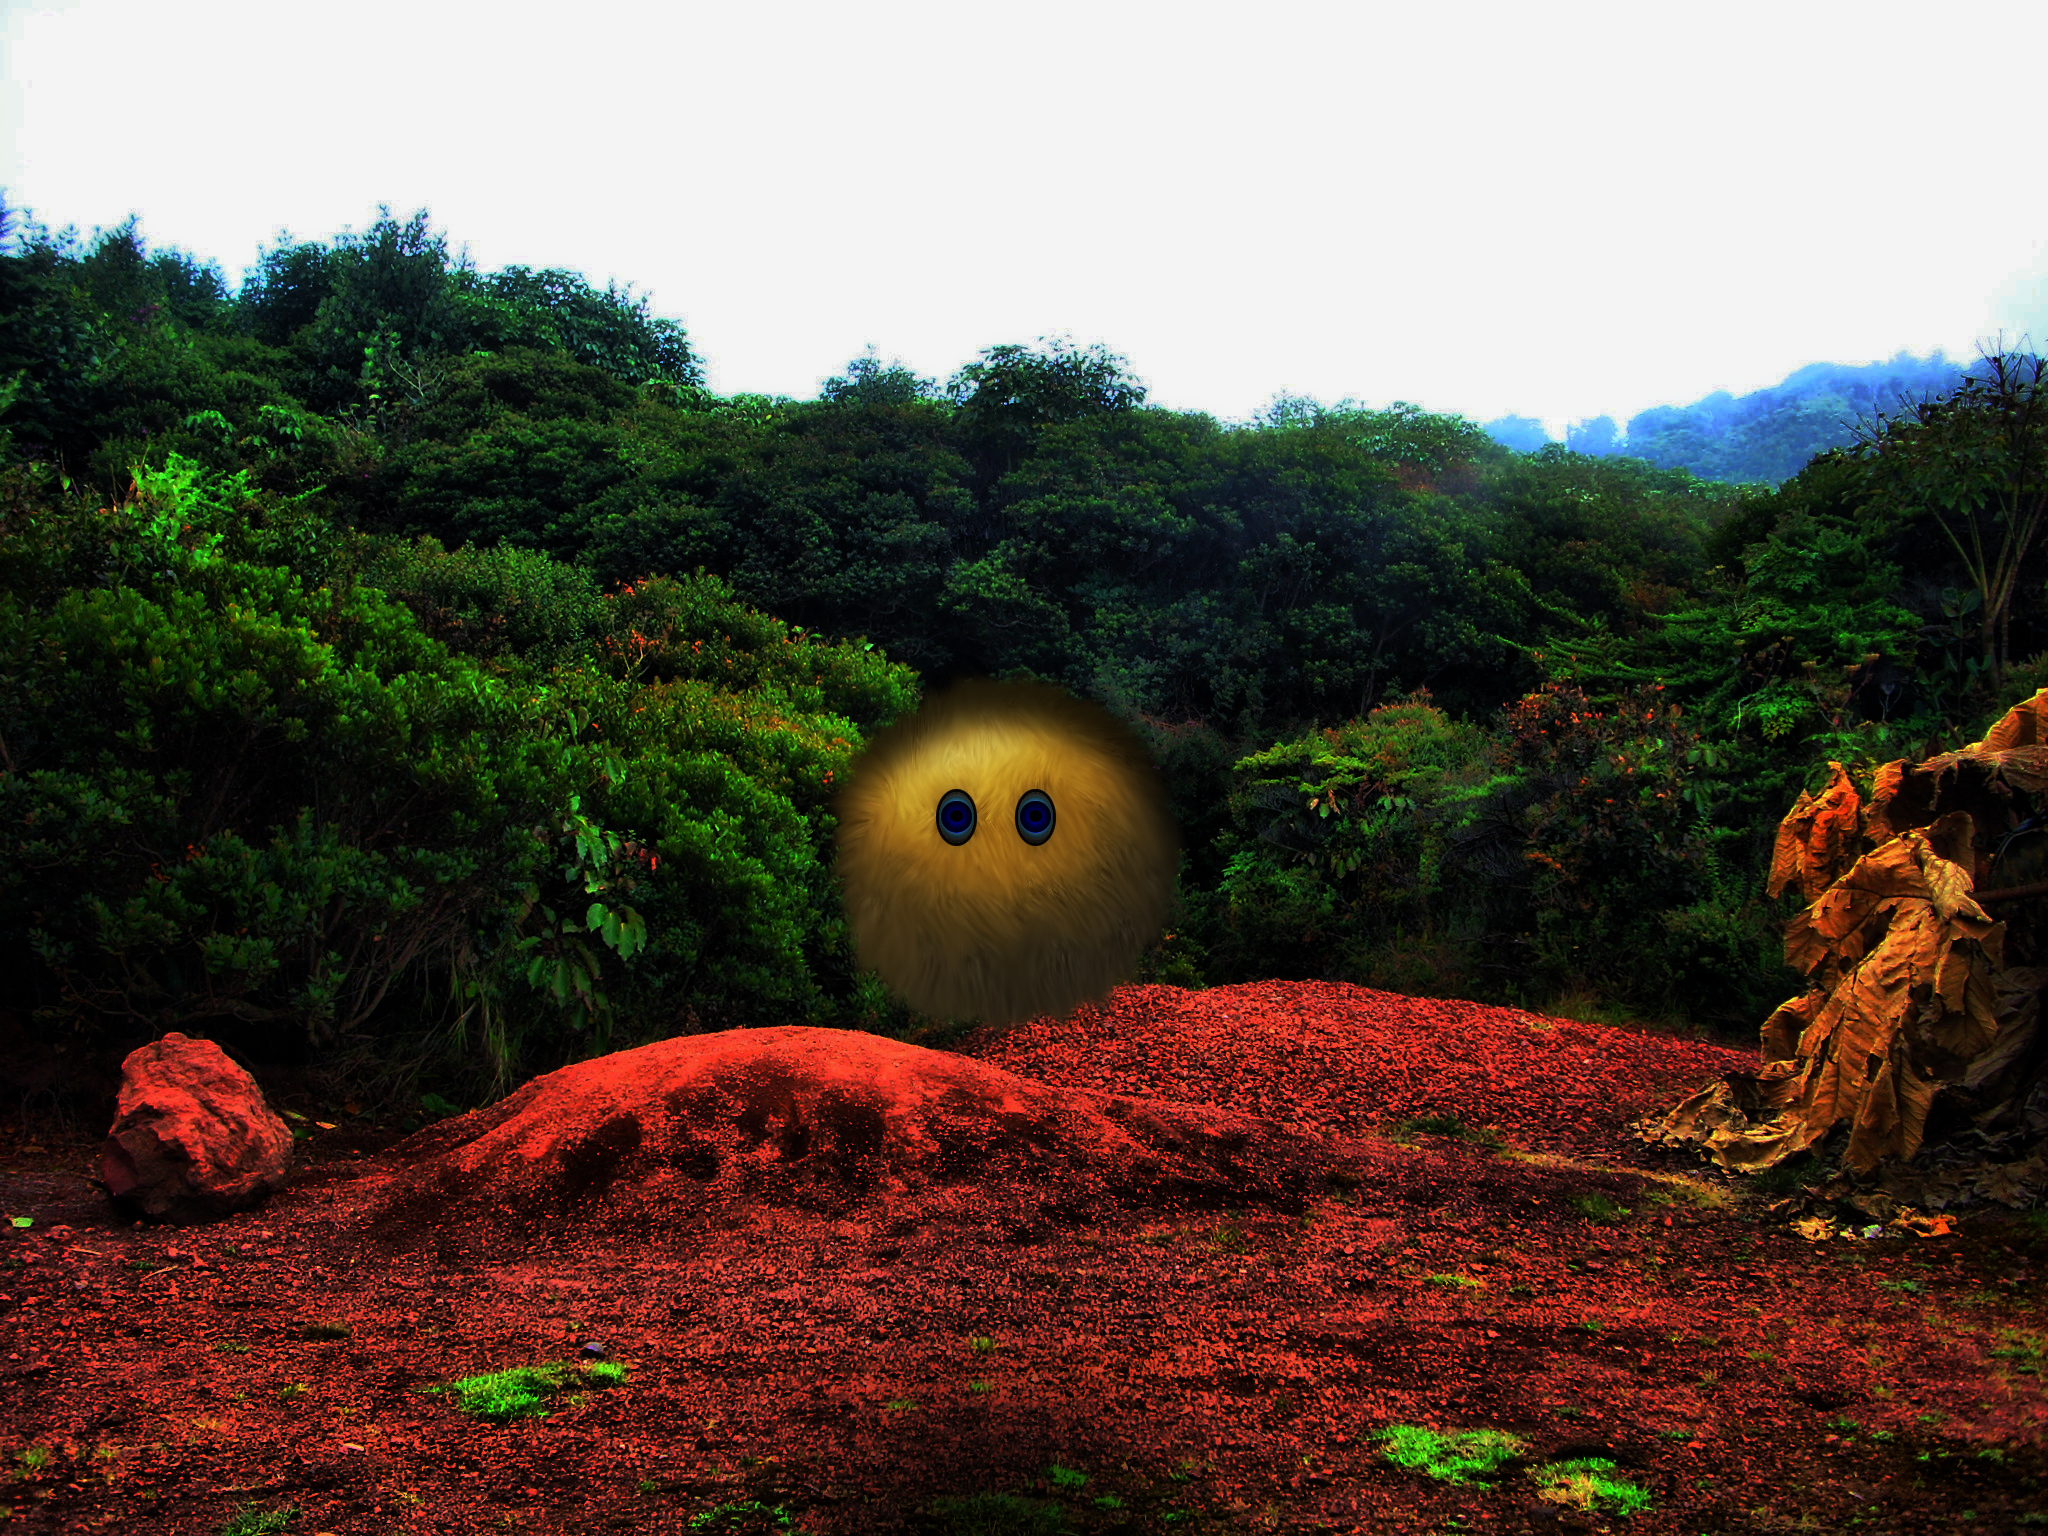 photography, manipulation, dirt, eye, forest, nature, tree